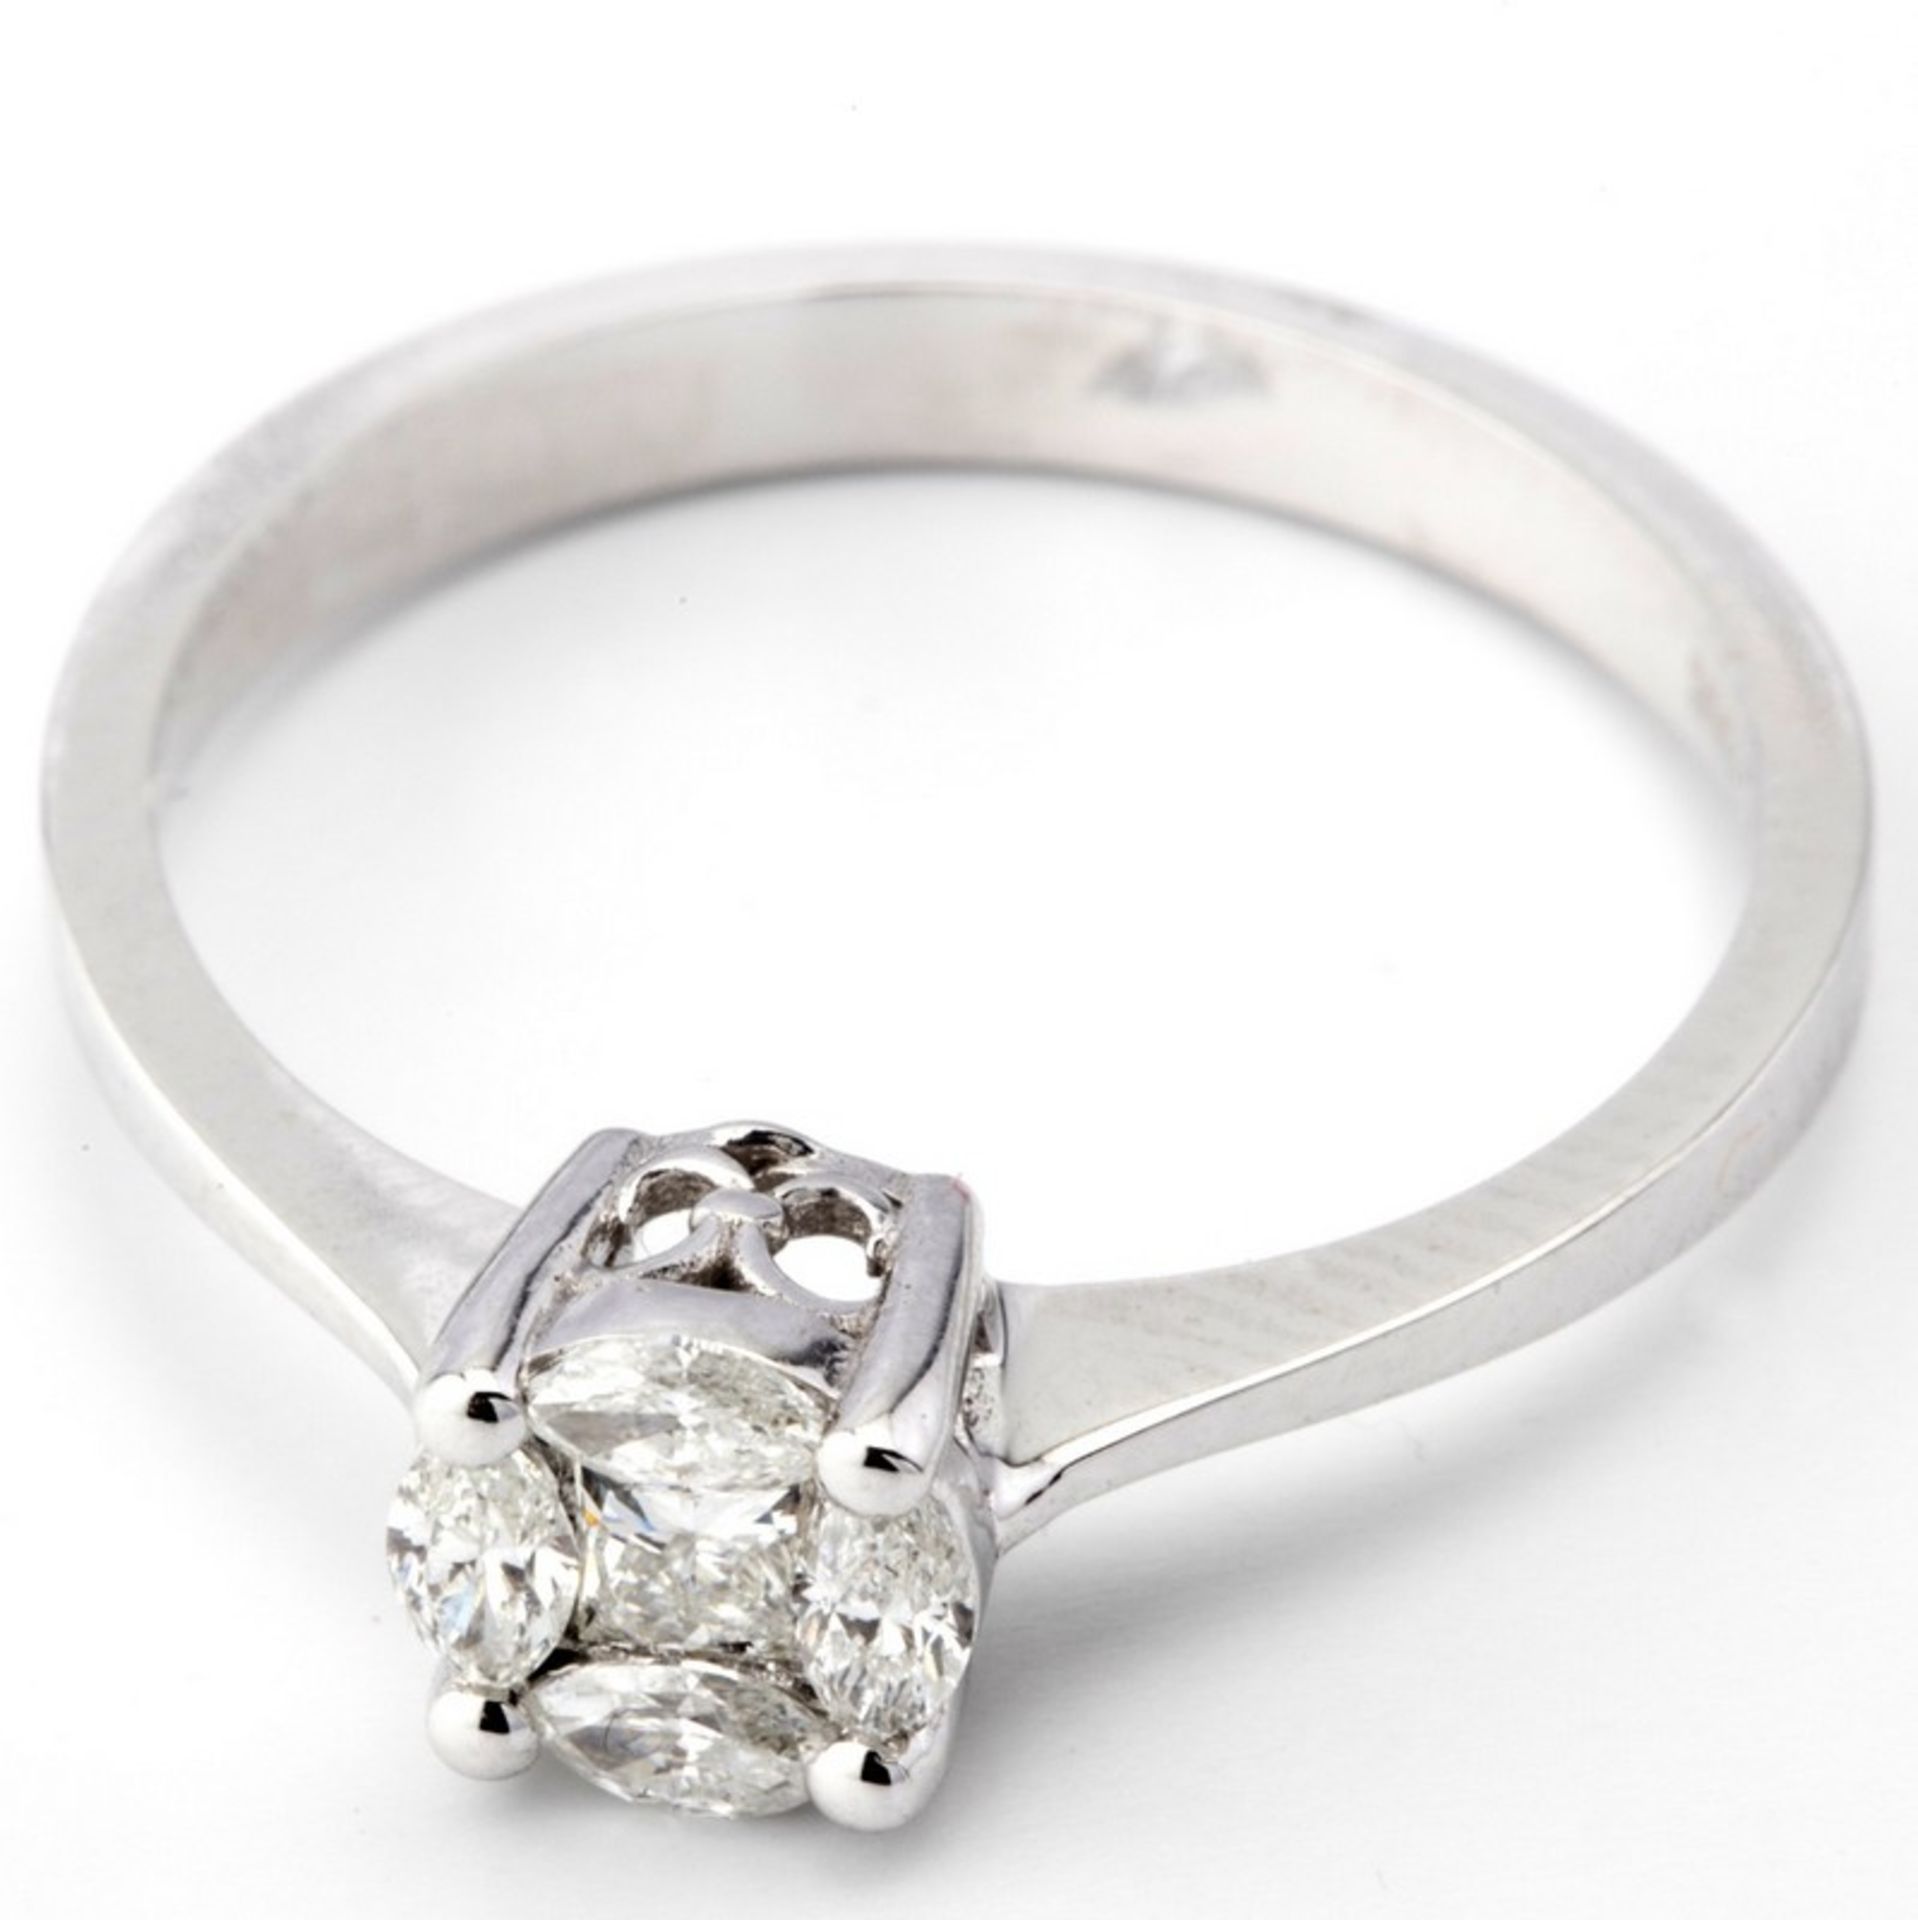 Certificated 14K White Gold Diamond Ring - Image 3 of 7